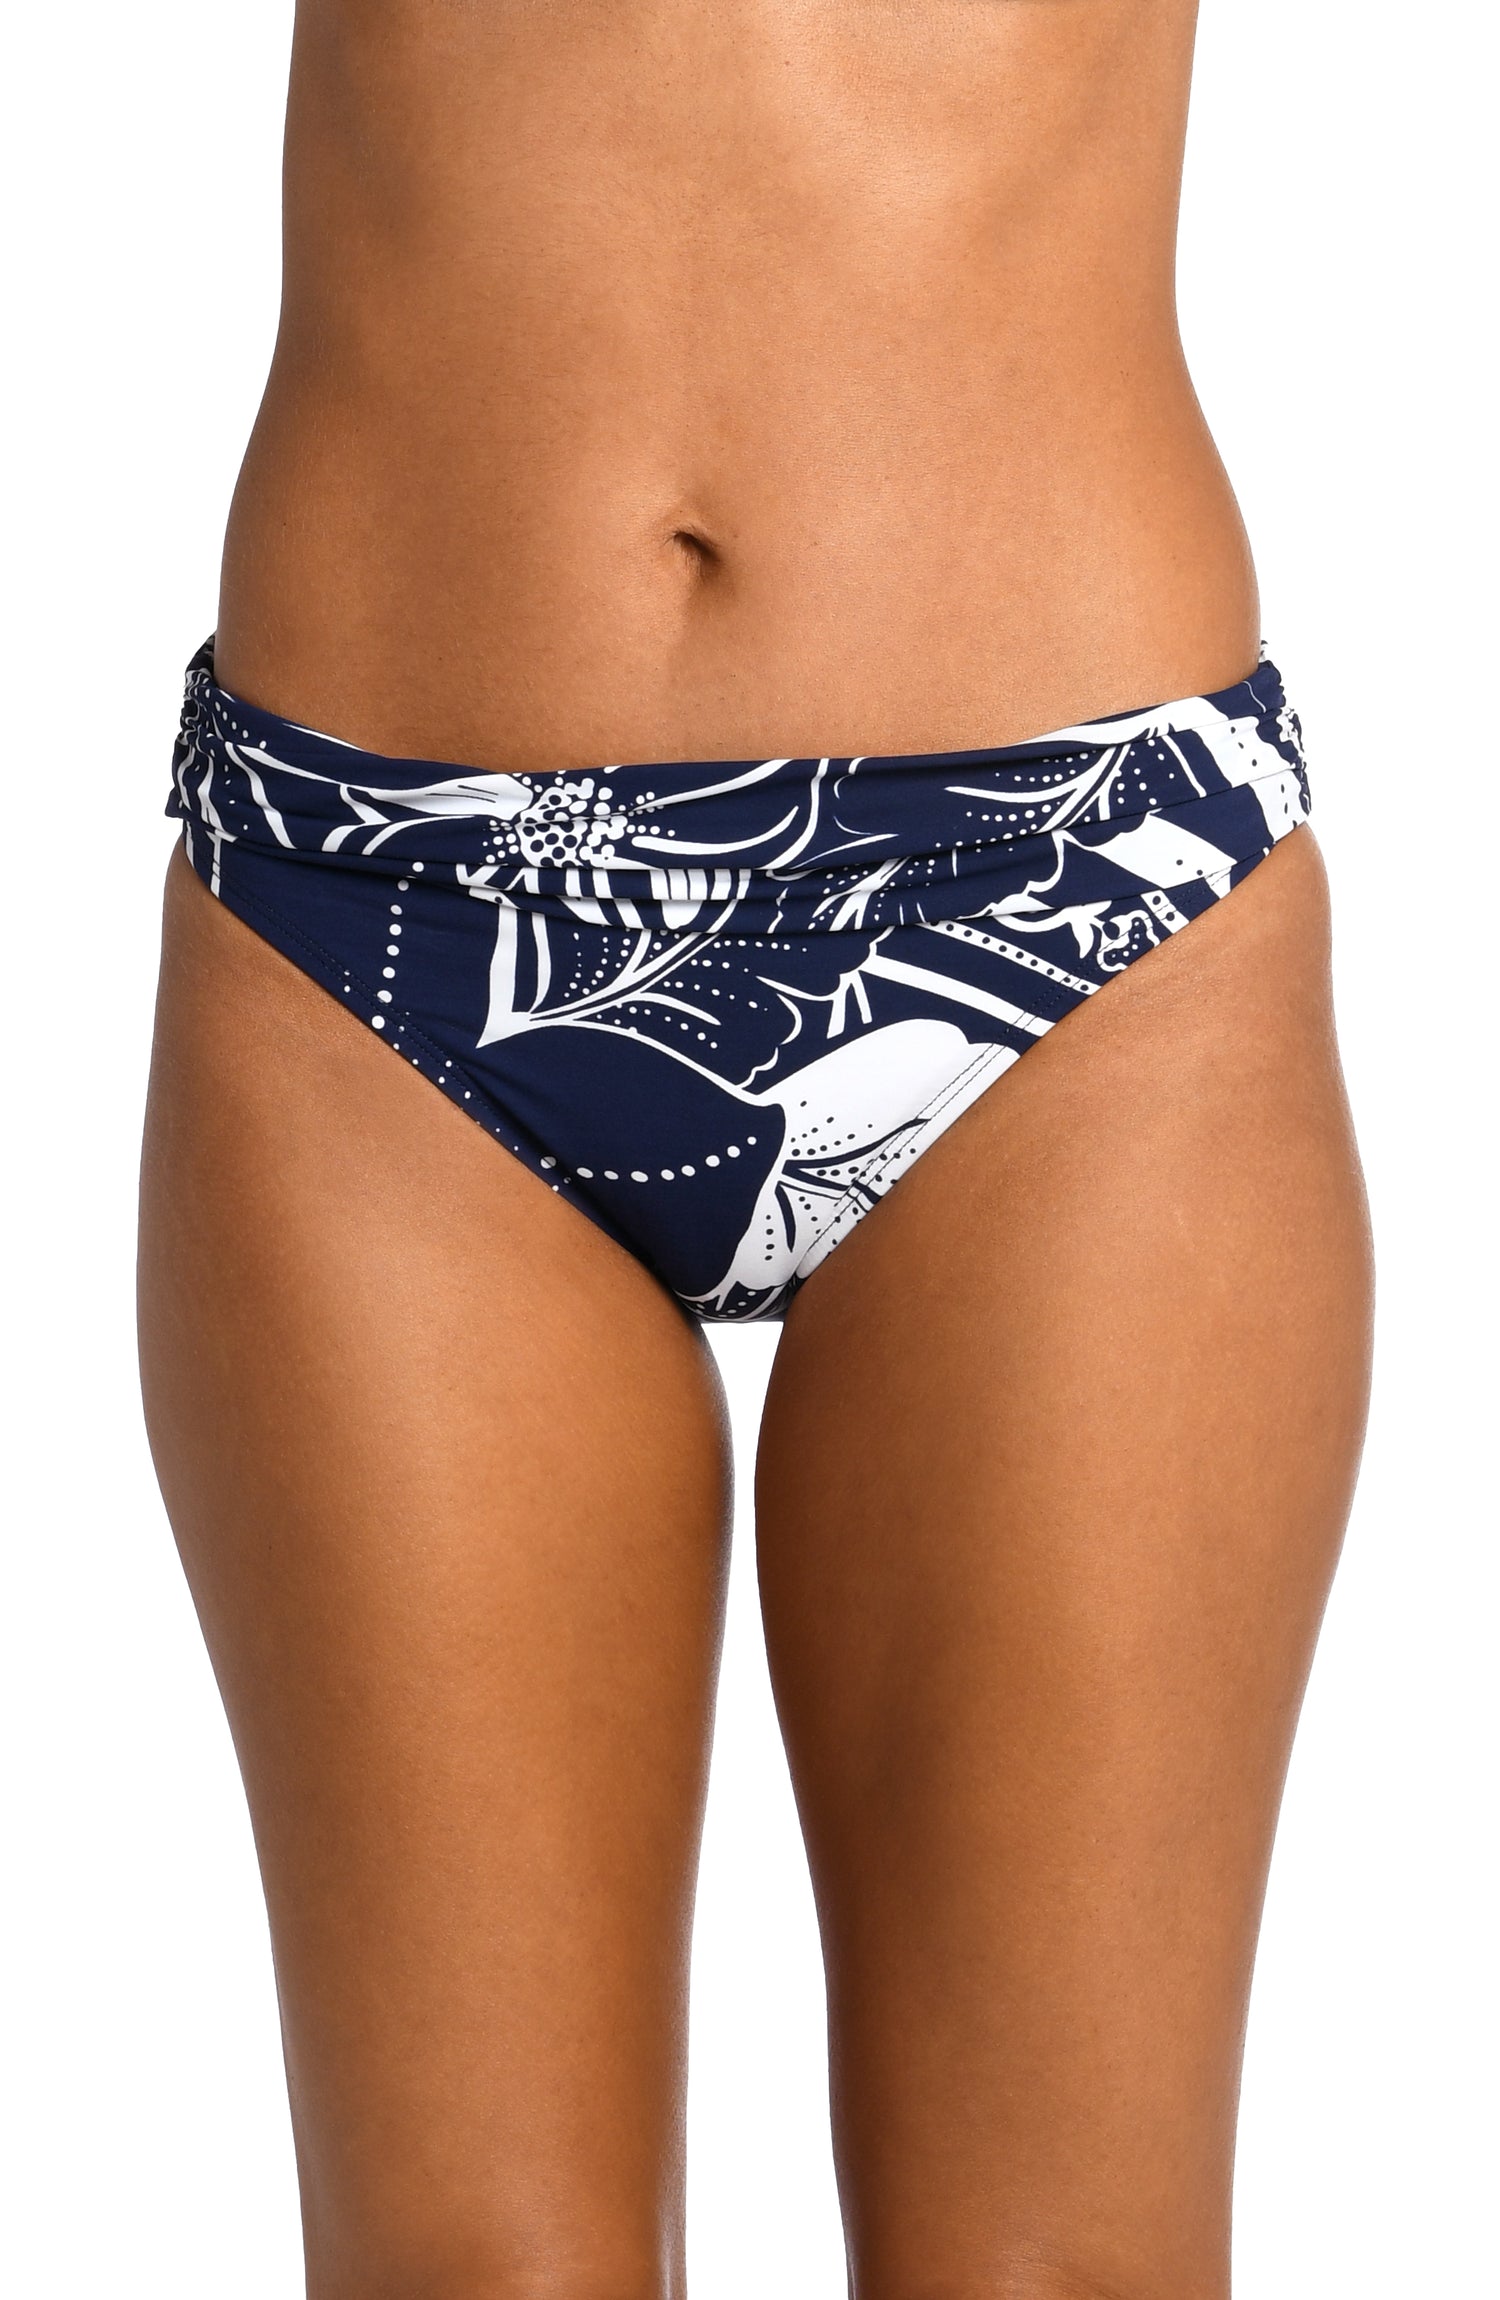 Model is wearing an indigo colored print with pops of white on shirred band hipster bottom from our At the Playa collection!